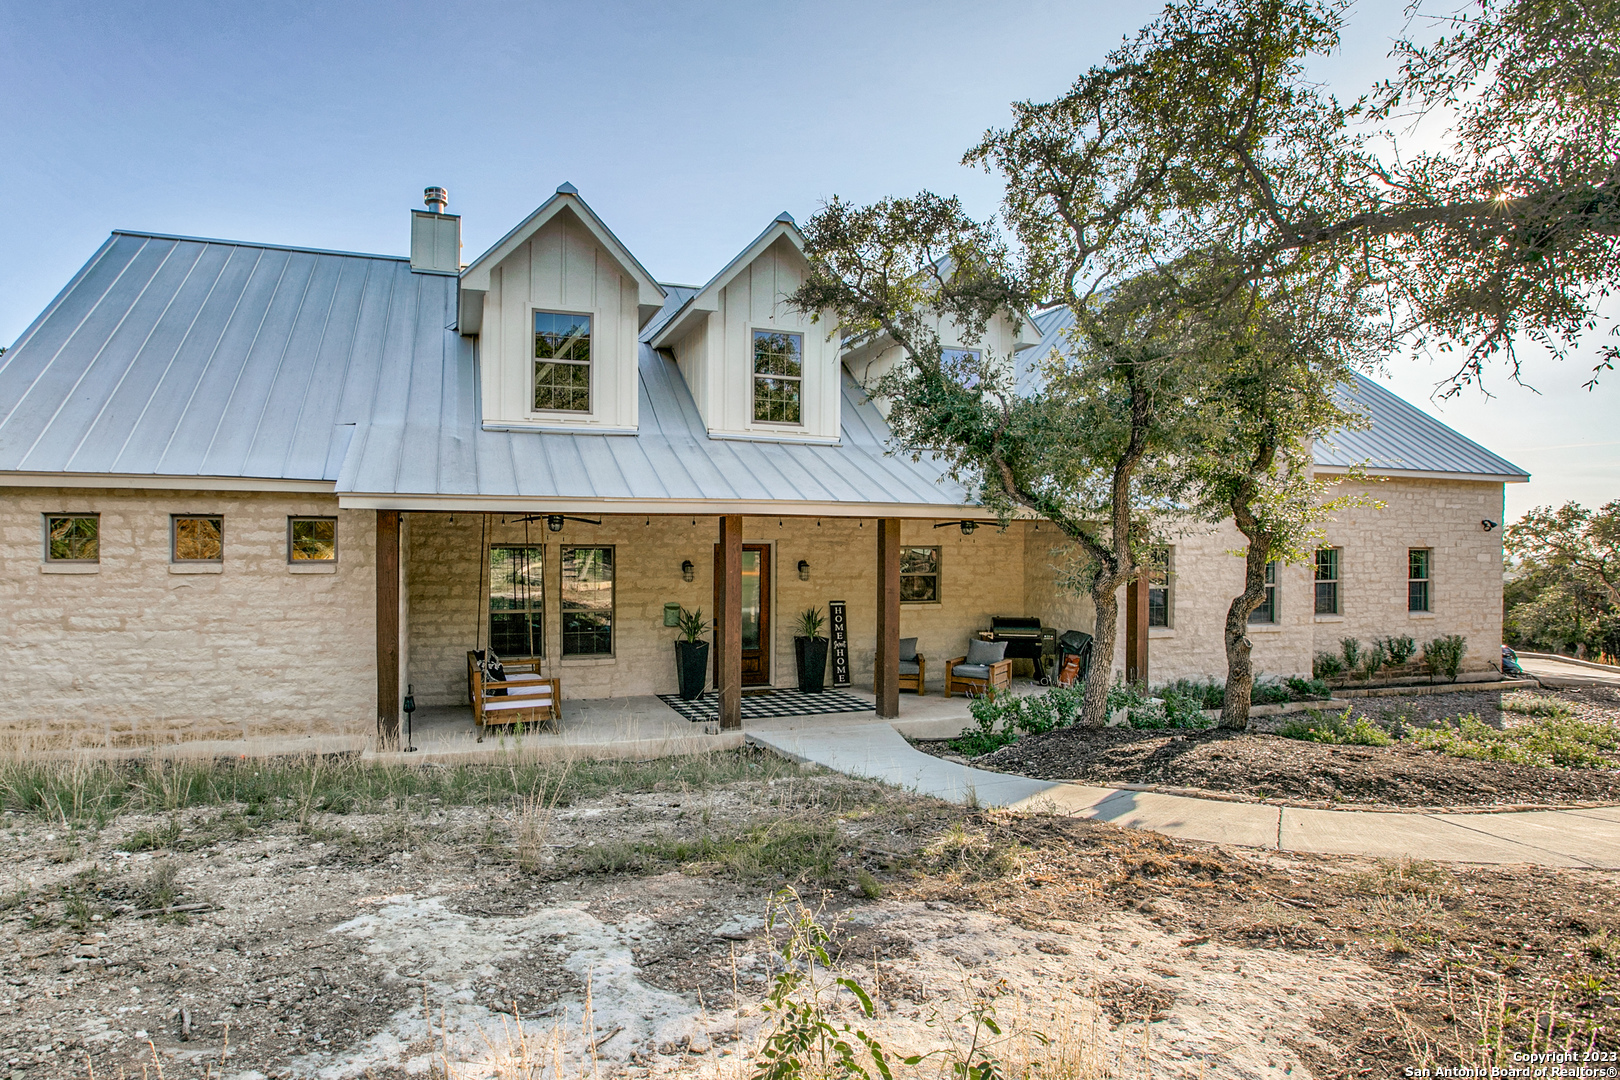 This spectacular custom-built Farmhouse is located in the beautiful Texas Hill Country with incredible views, in the gated community of Dancing Bear Ranch. It's absolutely amazing and a true stunner! Only minutes from Medina Lake, you have access to your own private lakeside park, exclusive boat launch, a fishing pier & residents only gate access. This one-of-a-kind 3,650 sq.ft. farmhouse design features 4 bedrooms and 3 baths, 20' vaulted ceiling in the living room, 18' vaulted ceiling in the downstairs master suite, and standard 10' ceilings throughout. This beautiful two-story layout features a spa style master bath with 2 rain shower heads and walk-in shower, his and her sinks and granite counter tops, plus two oversized walk-in closets. There are two very spacious bedrooms upstairs as well as a grand-sized full bathroom with granite counters, double sinks and mirrors giving everyone their own space. An upstairs office/workstation sits adjacent to the upper-level bedrooms and an open multi-use 26' X 25' bonus space that is perfect for a game room, home gym, or a private home theater. Plus, it has a spectacular view of the Texas Hills! There are exquisite custom home finishes throughout the home, from the Brazilian "Ornamental White Ice" granite in the kitchen and baths with complementary high-end fixtures you would only expect in your custom home. You will find plenty of storage in the custom cabinets throughout the home and plenty of closet space! Upscale super-size side by side refrigerator/freezer in stainless steel, two ss ovens, a built-in microwave and a coffee bar that makes this kitchen a great place to entertain or cook to your heart's content. A kitchen bar provides seating space for guests or family, a huge walk-in pantry with custom shelving and an offset dining room that is surrounded with views of the outdoors, all perfect for entertaining. An open floorplan throughout gives you room to breathe and includes the large living area anchored with a 20' Texas limestone brick fireplace and rustic hand-hewn solid wood beam mantel. Wood tile floors flow throughout the downstairs level with a beautiful wood staircase inviting you upstairs. Separate mudroom and laundry spaces keep this home open and high functioning. The three-car/truck oversized garage is finished with epoxy floors and is insulated with finished and painted walls- perfect for adding a home gym and still having plenty of space to park. A covered patio with an elevated terraced lawn is just the place to take in the view and relax. This great looking and spacious home sits on a 2+ acre lot with no rear neighbors and offers plenty of privacy! There is ample usable land as cedar was cleared to make room for animals and outdoor play. This homesite offers exclusive Texas hill country views, plus the peace and quiet you would expect in a home that truly offers Texas Living at its Finest. Come and fall in love with your future home!